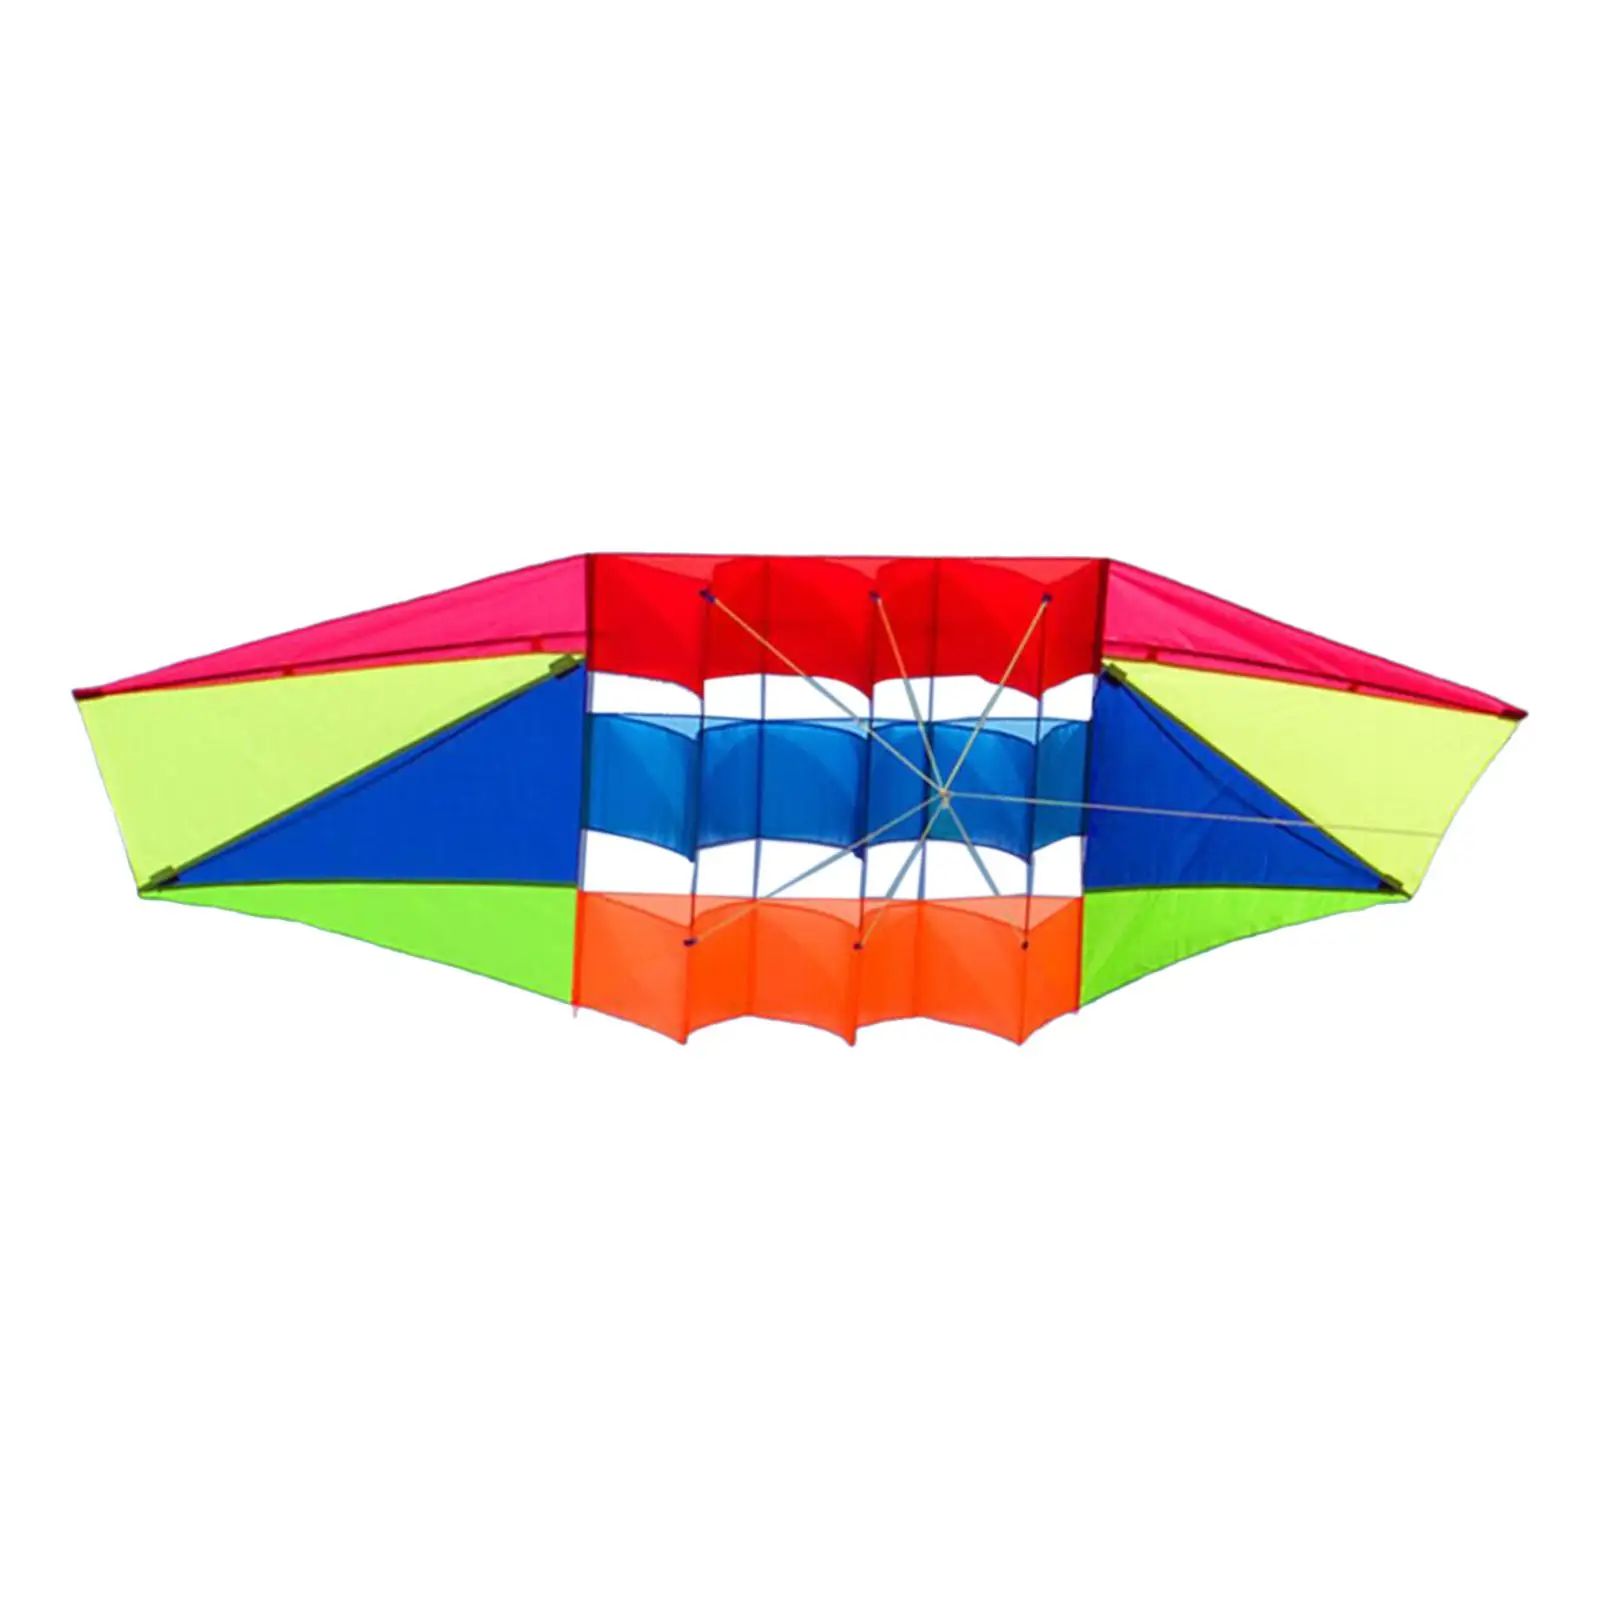 Large  Outdoor Sport Toys Easy to Fly Parachute Single Line s Surfing Beach s for Children Girls Boys